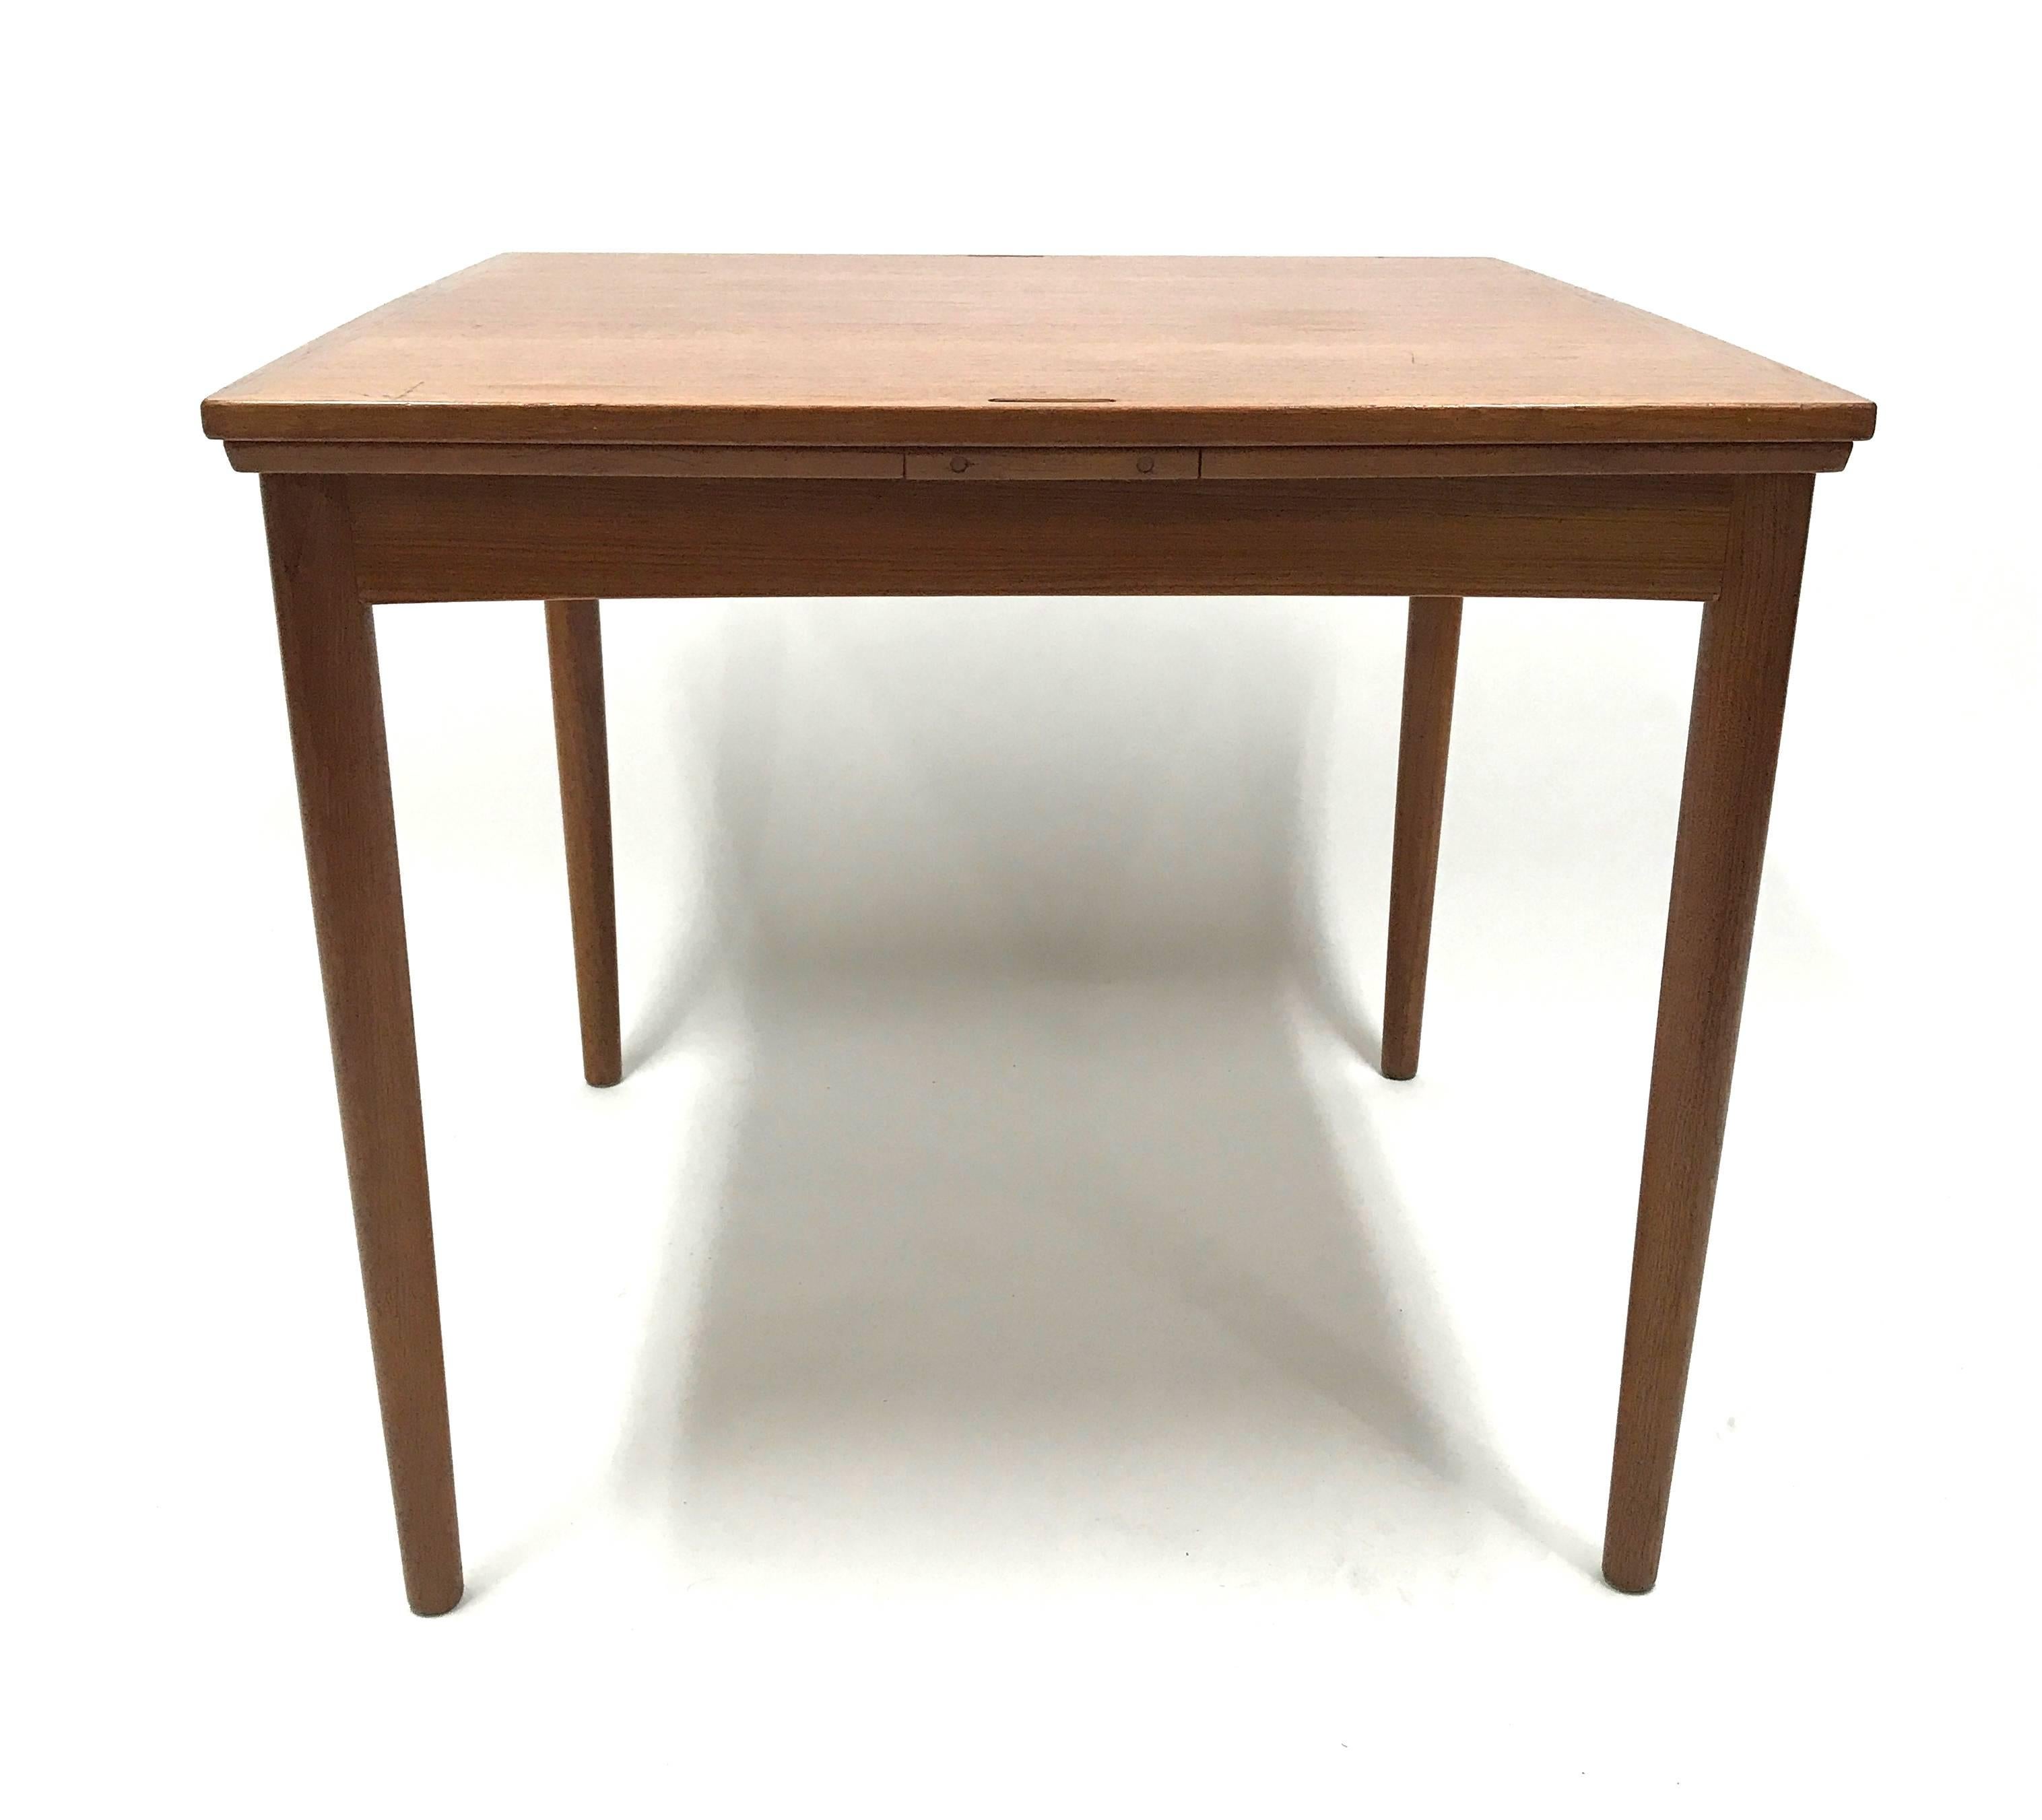 This 1960s reversible-top Danish teak table in the manner of Poul Hundevad with pull-out extendable leaves is perfect for a game room, kitchen or a versatile extra dining table for large gatherings. 

The reversible flip-top is teak on one side,